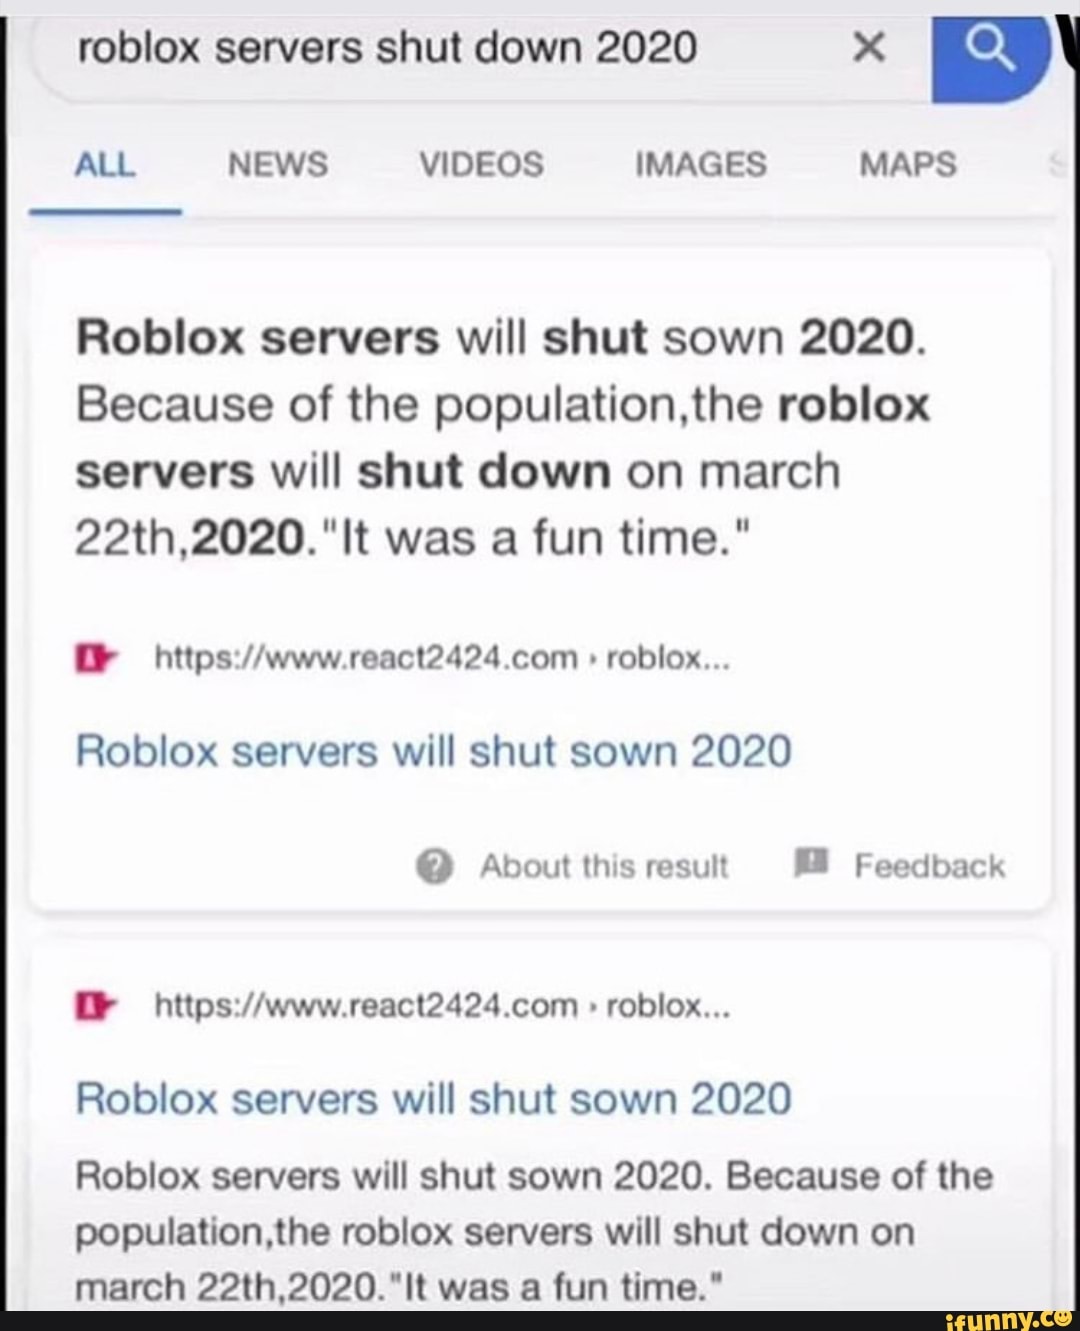 Roblox Sewers Shut Down 2020 X Roblox Servers Will Shut Sown 2020 Because Of The Population The Roblox Servers Will Shut Down On March 22th 2020 Lt Was A Fun Time D Httpszl Wwwireac12424com